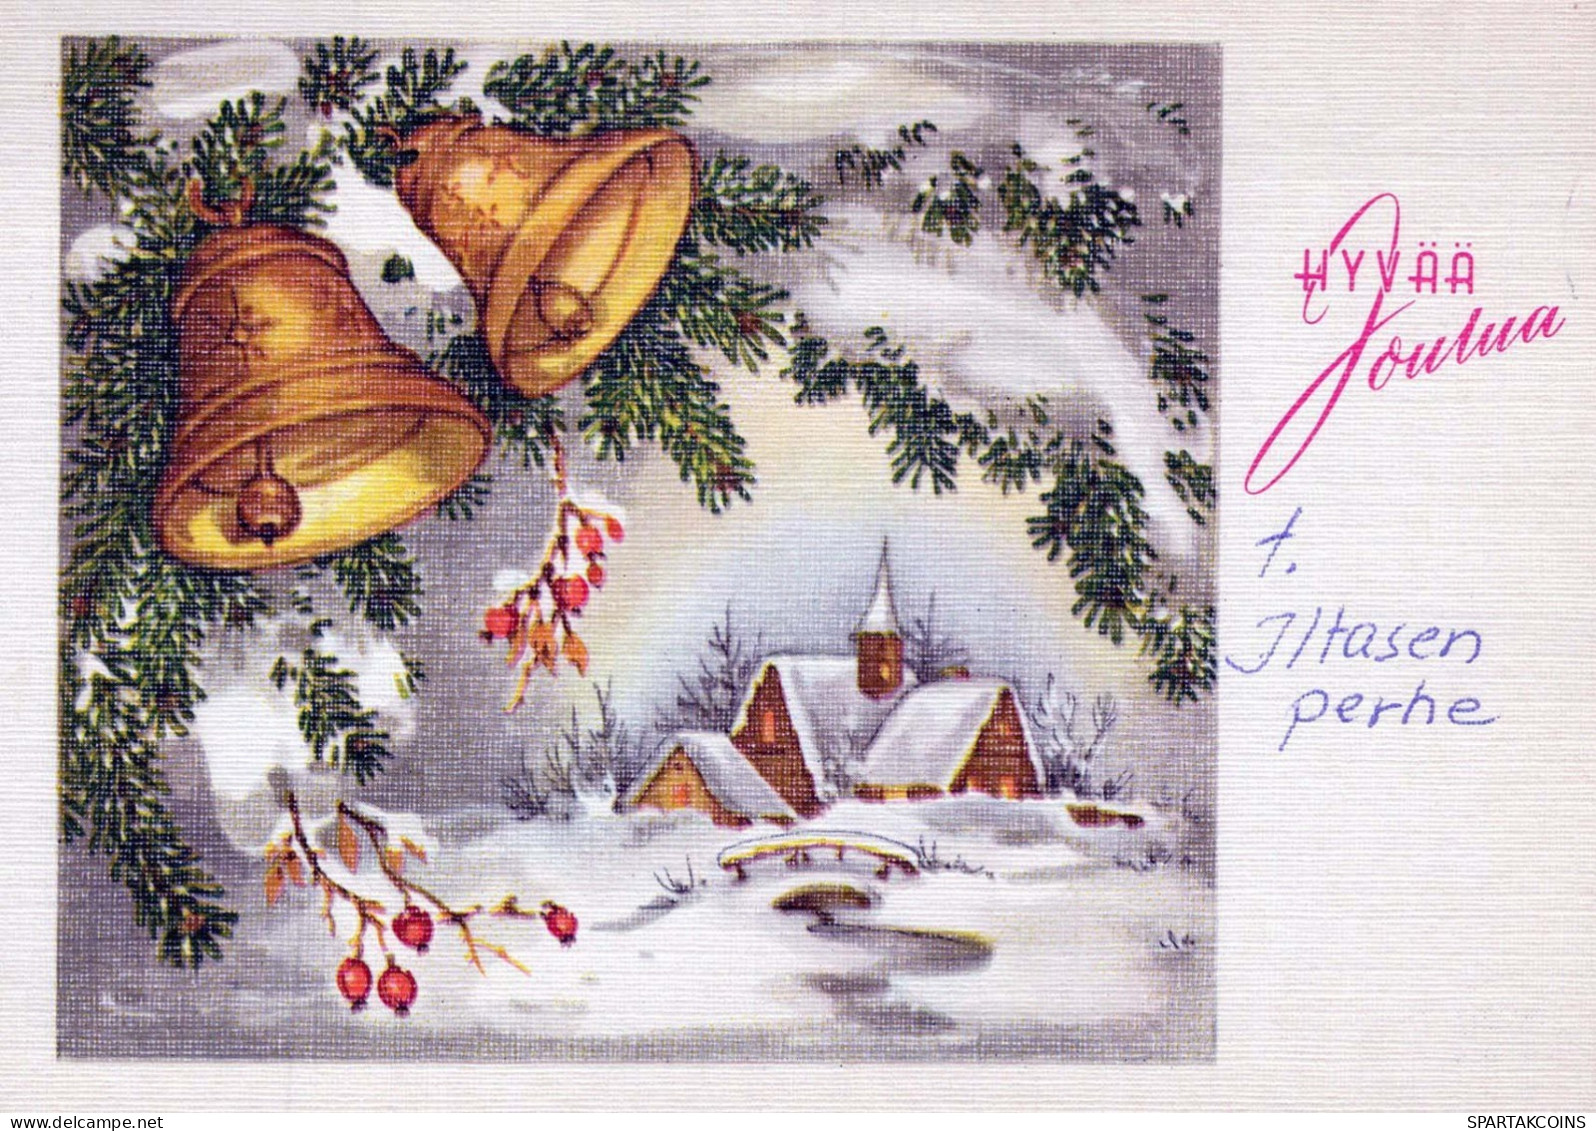 Buon Anno Natale CHIESA Vintage Cartolina CPSM #PAY323.IT - Nouvel An